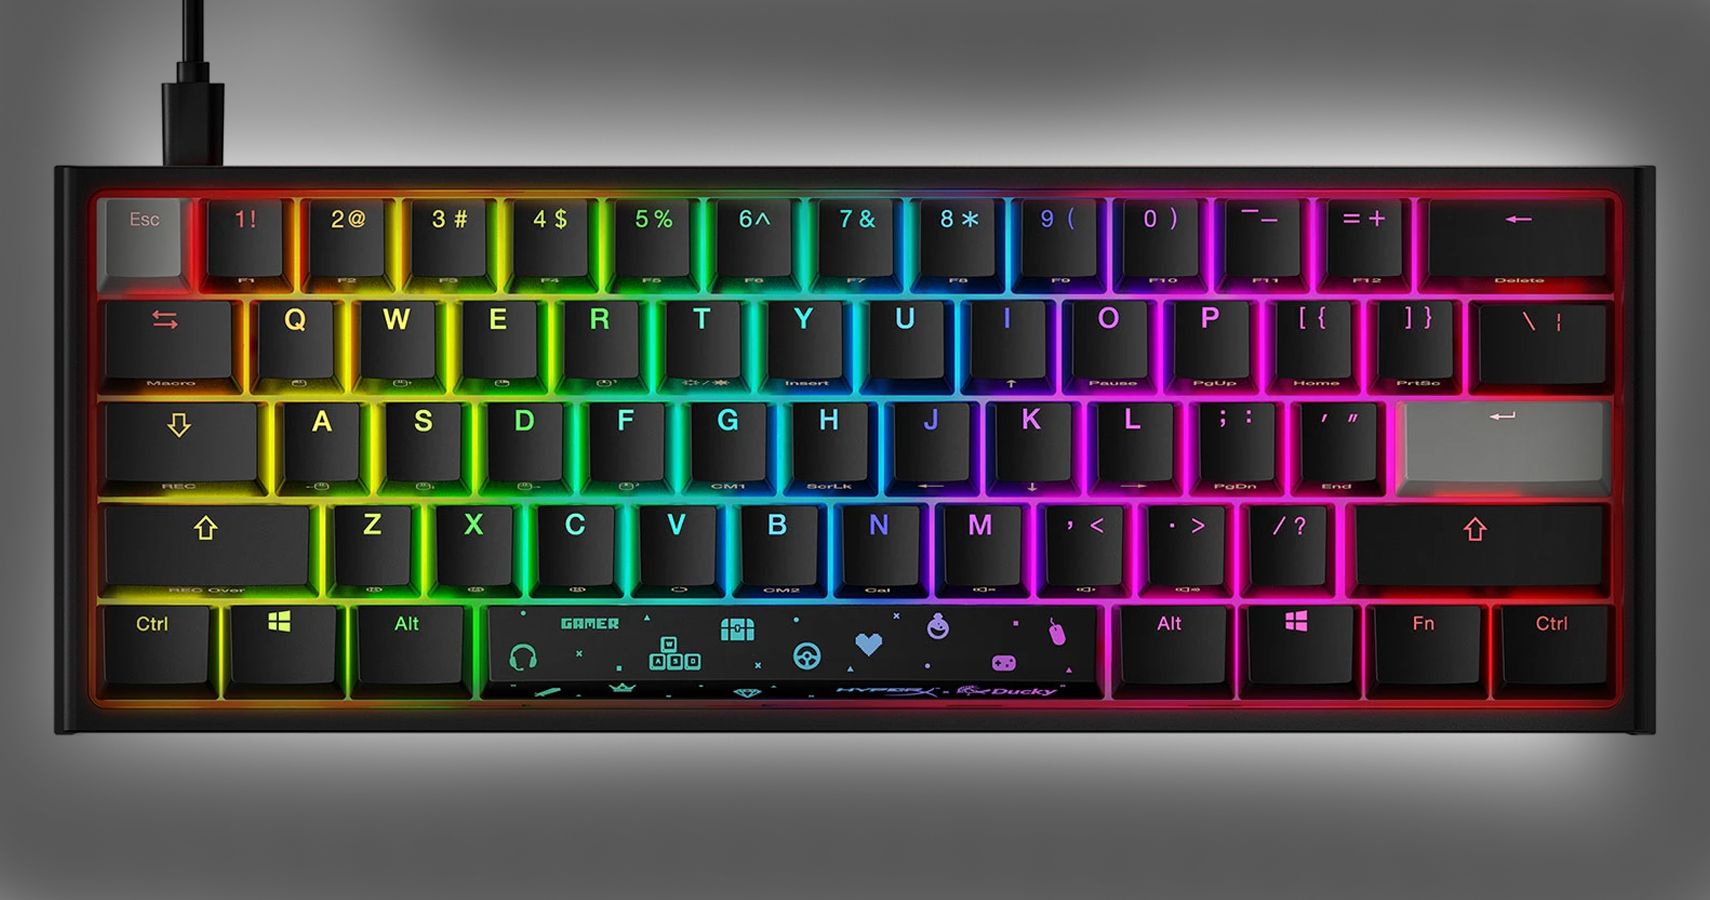 Hyperx X Ducky One 2 Mini Keyboard With Black Colorway Review It S Back And Just As Good